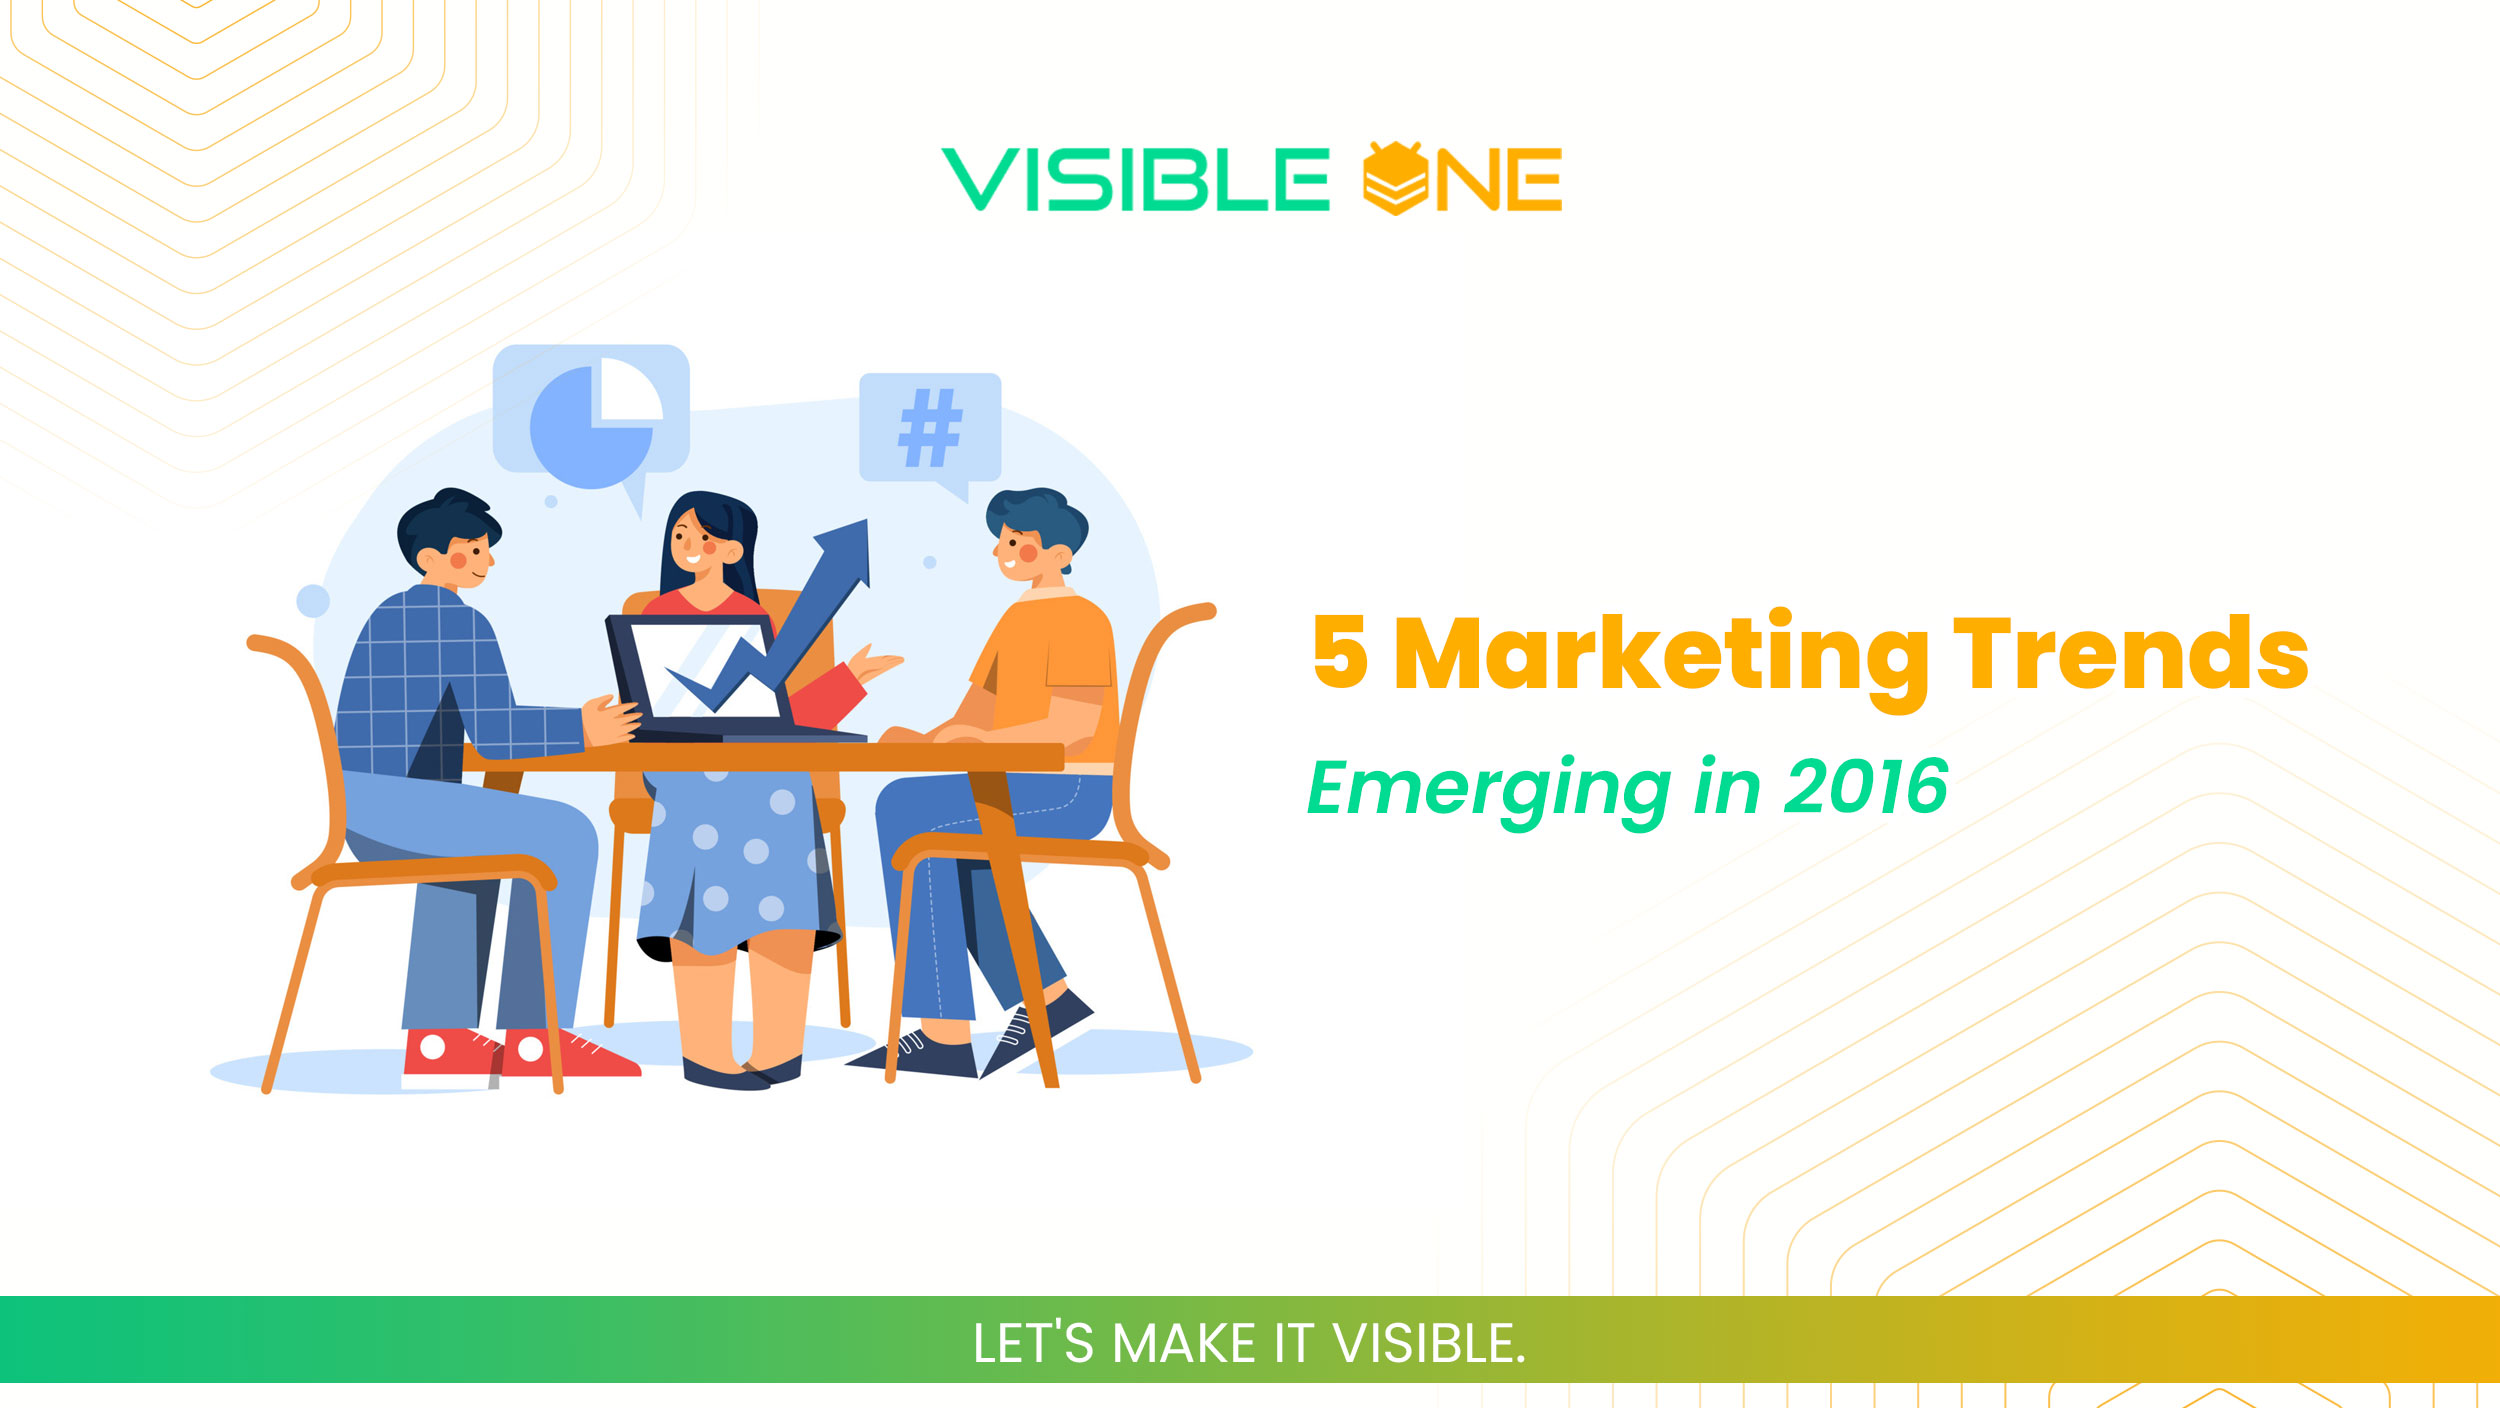 5 Marketing Trends Emerging in 2016